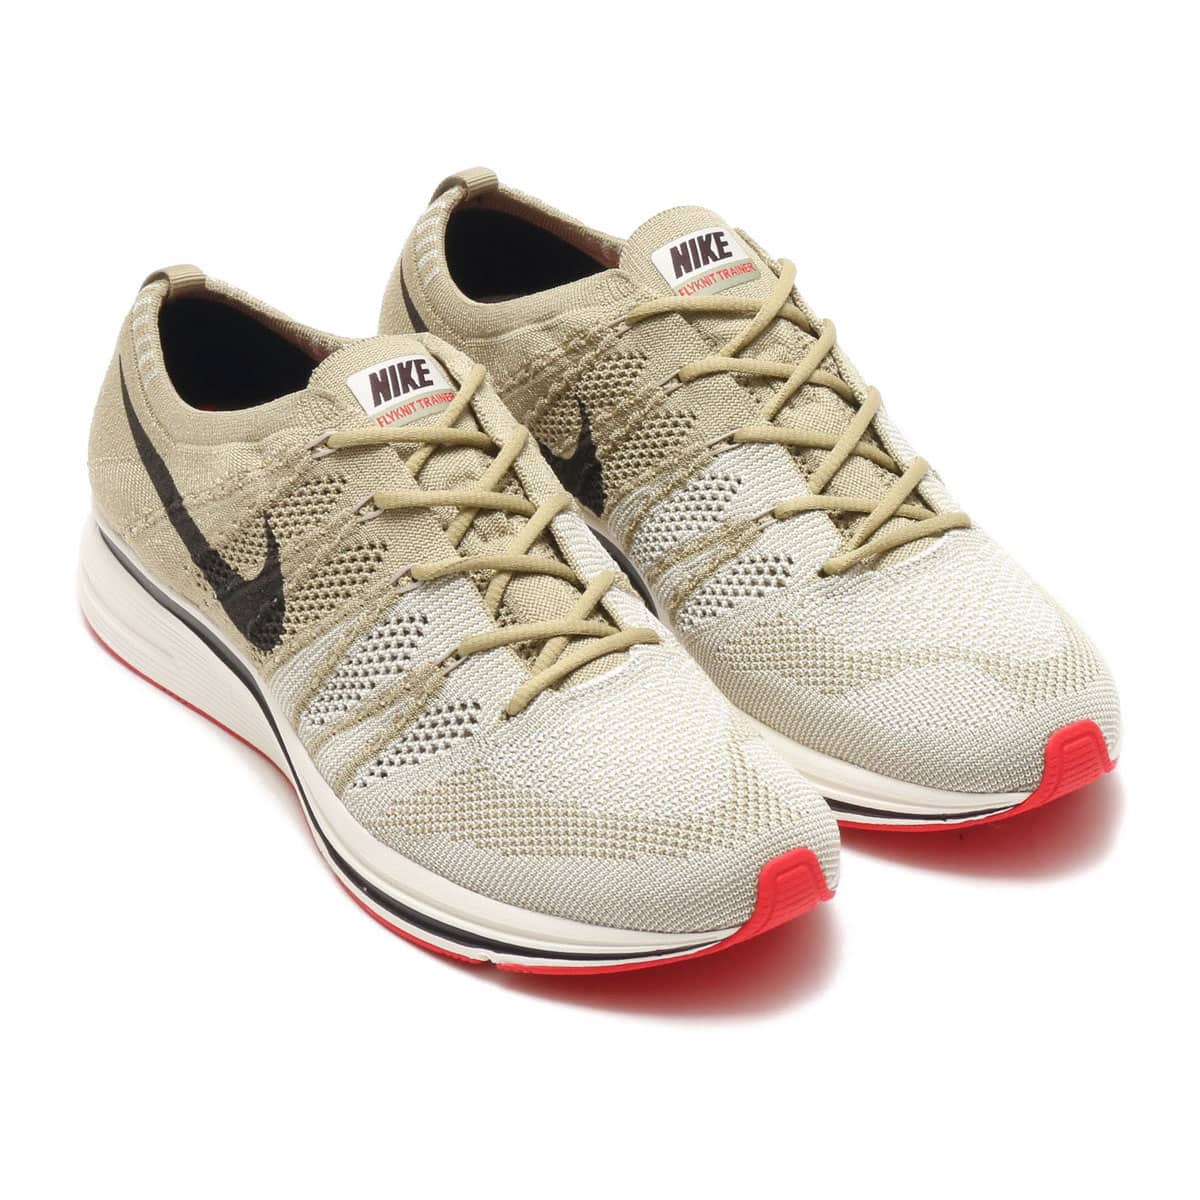 NIKE FLYKNIT TRAINER NEUTRAL OLIVE 